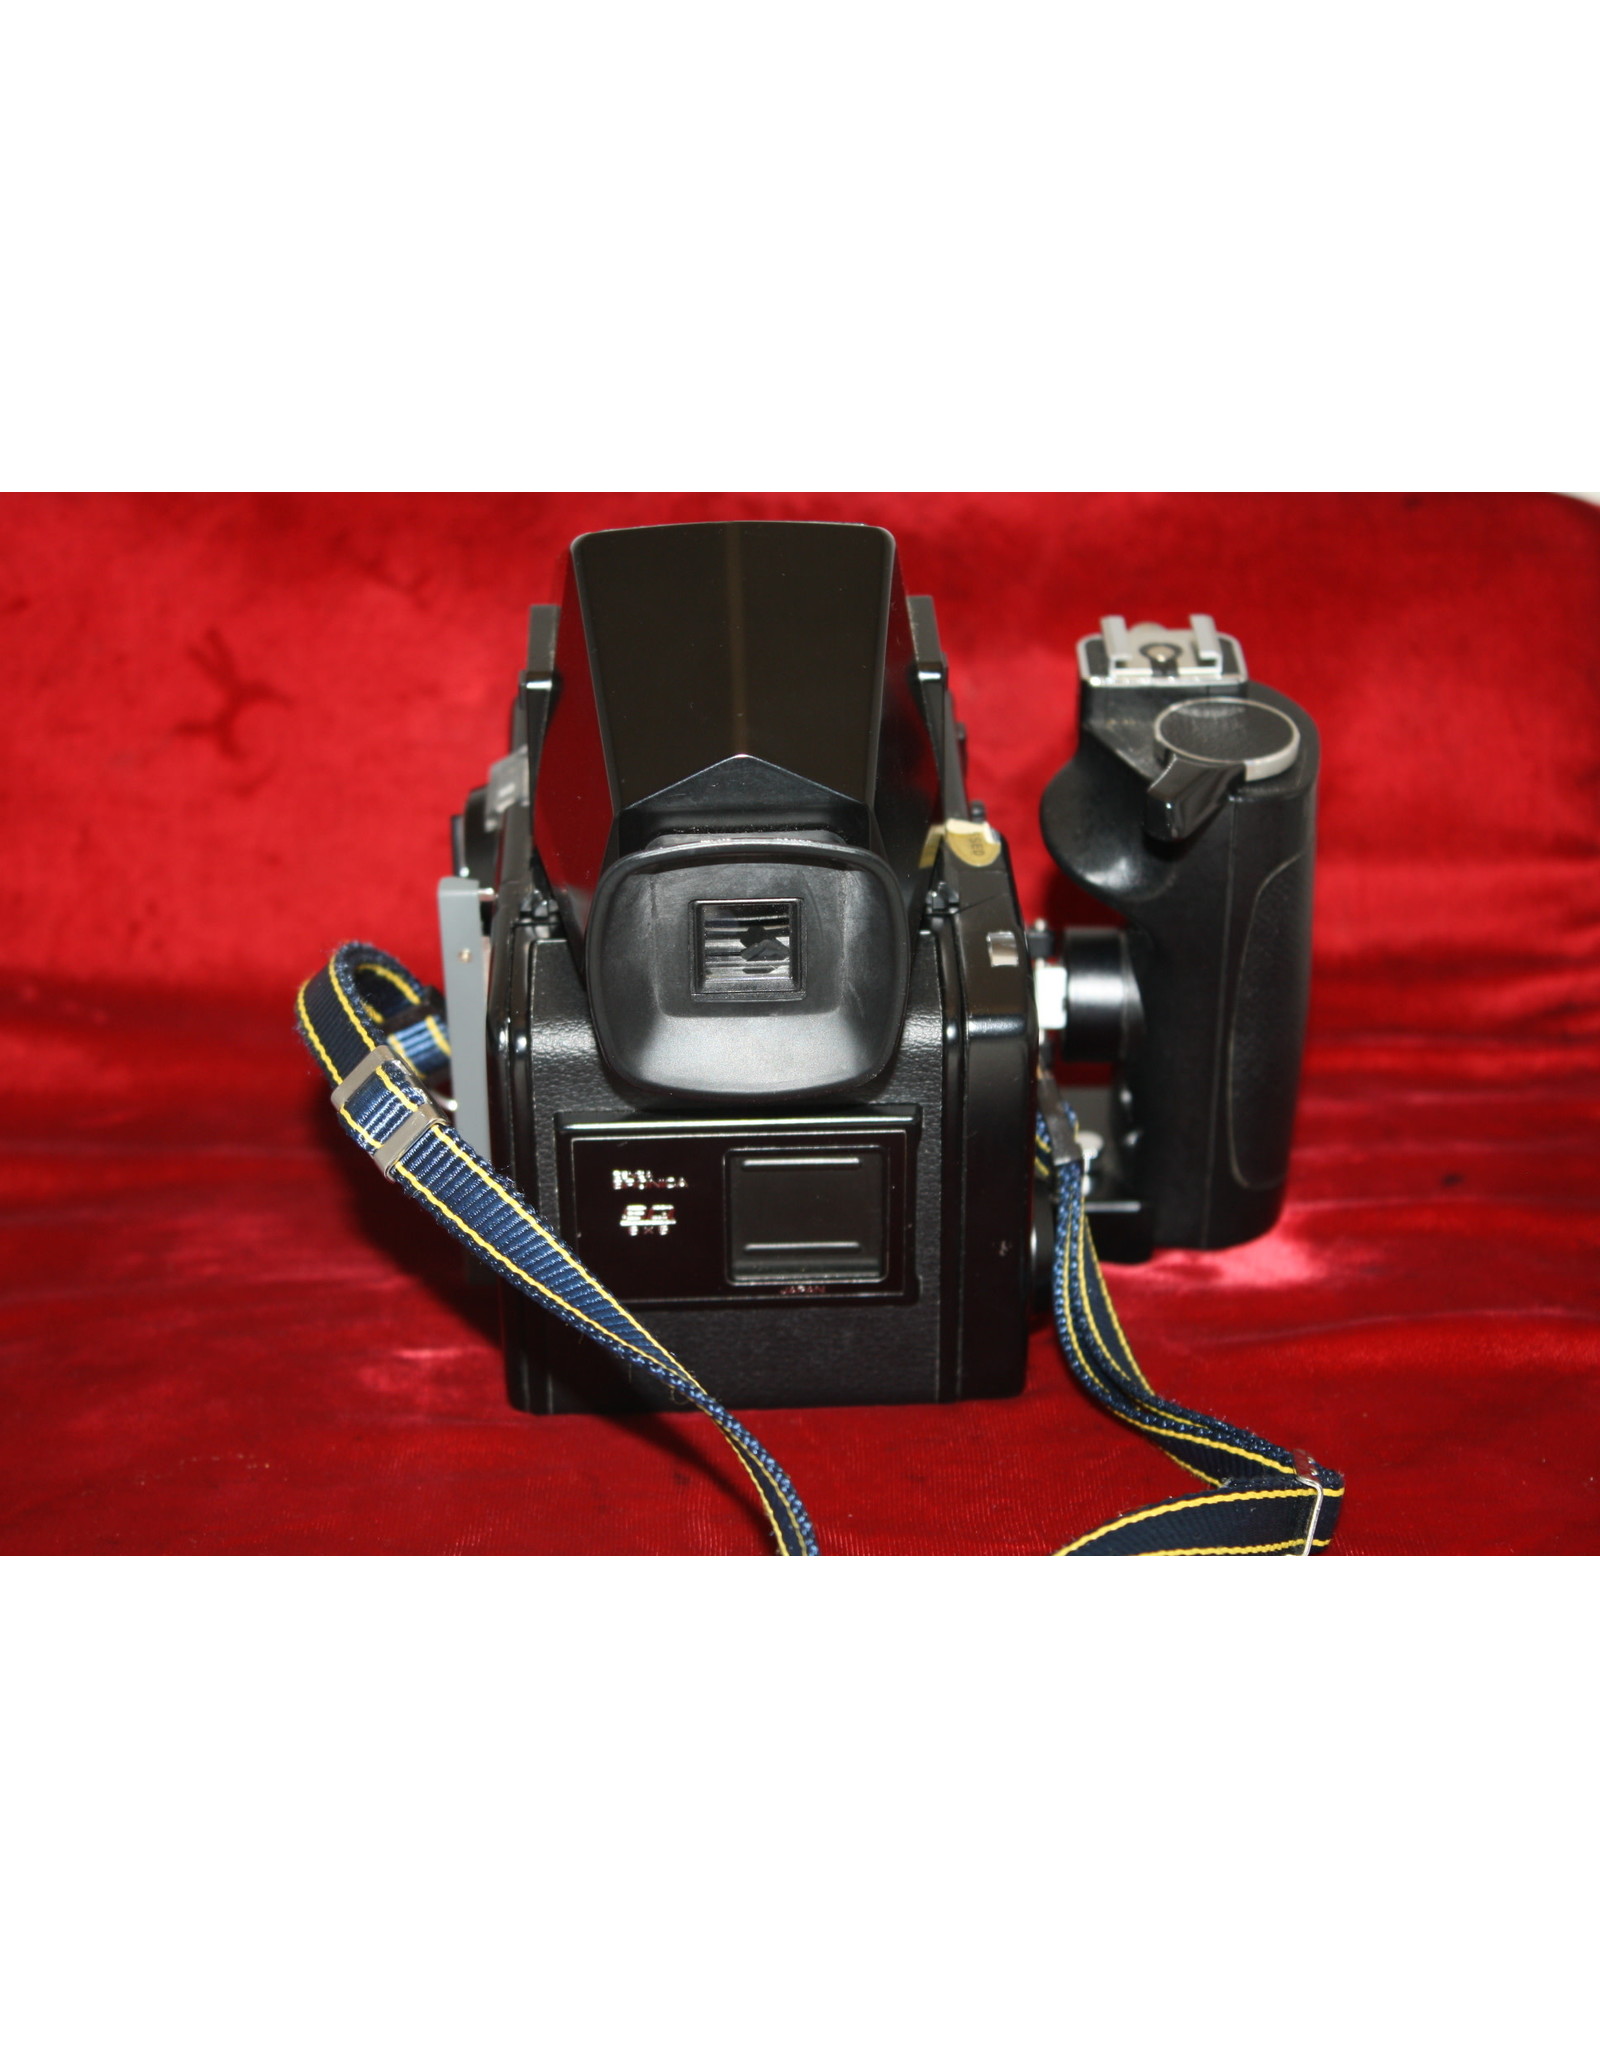 Bronica Bronica SQ-A body with auto prism finder, 120 back, speed grip and strap (MINT)